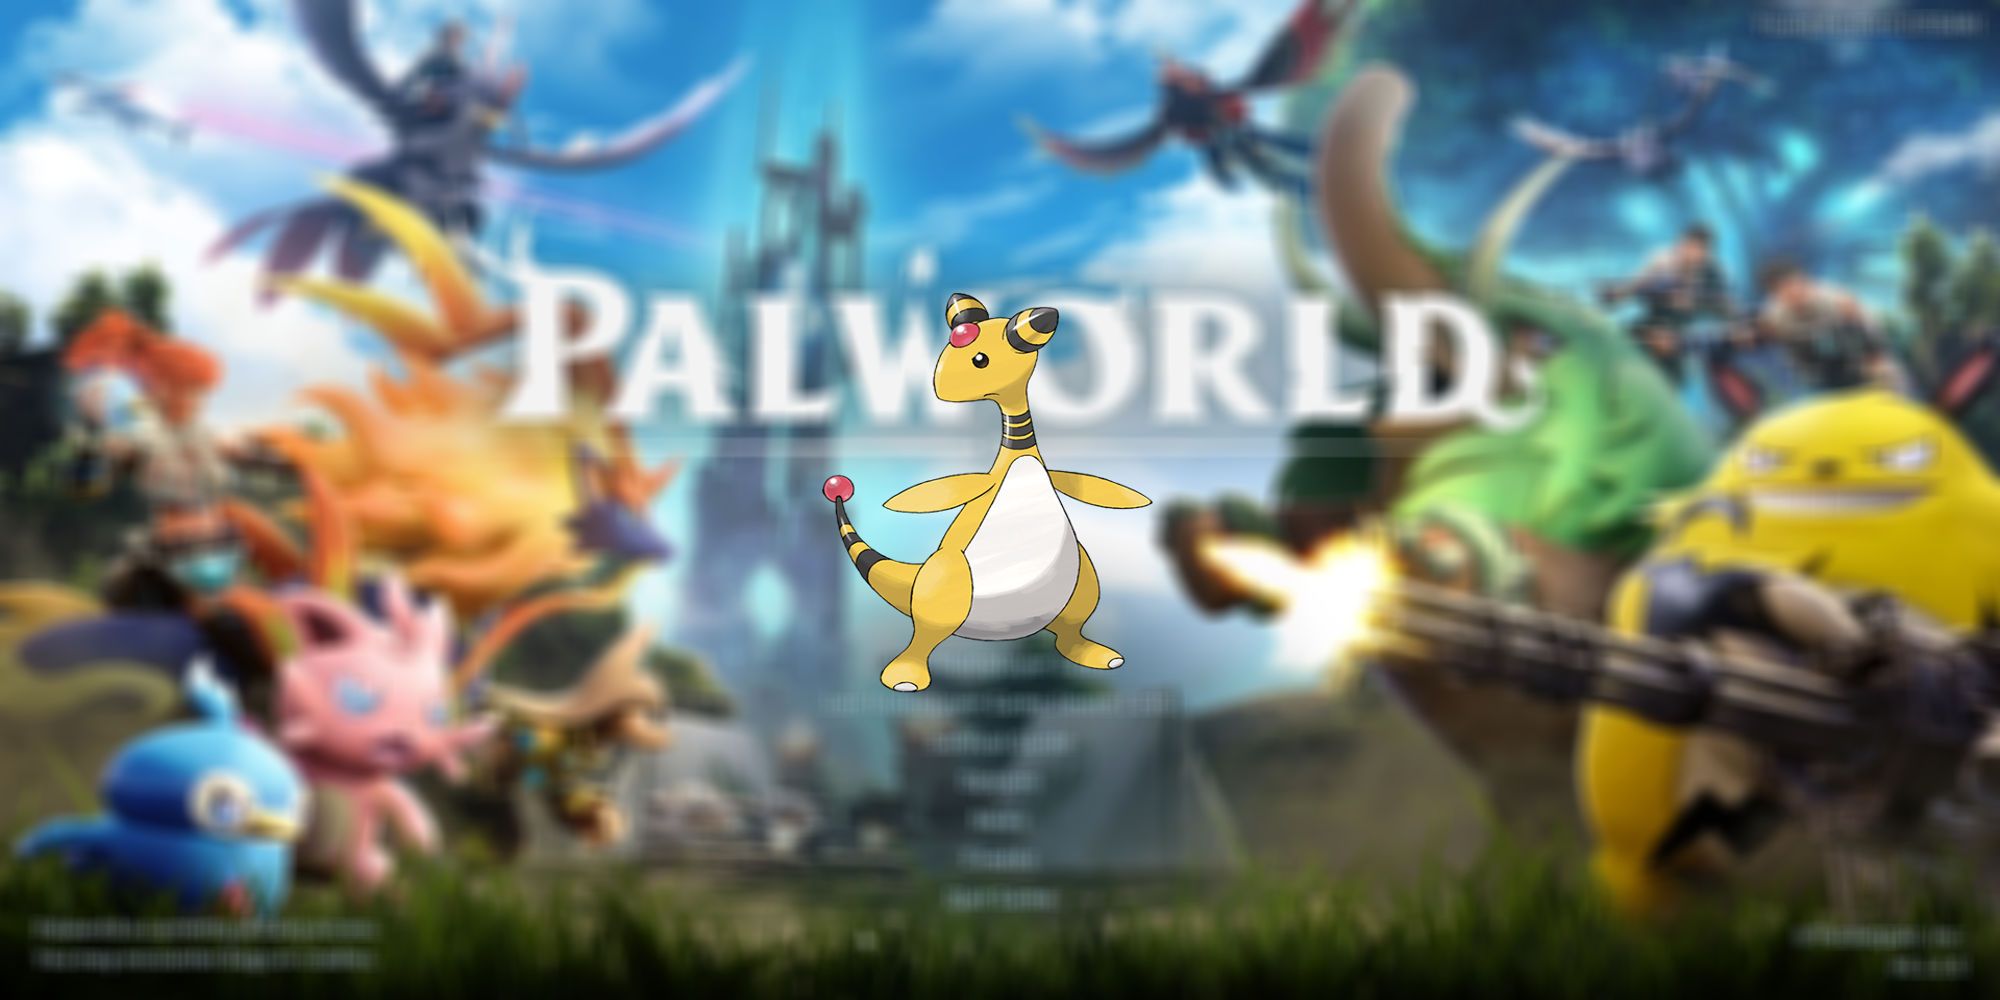 Ampharos from Pokemon potentially fitting in Palworld